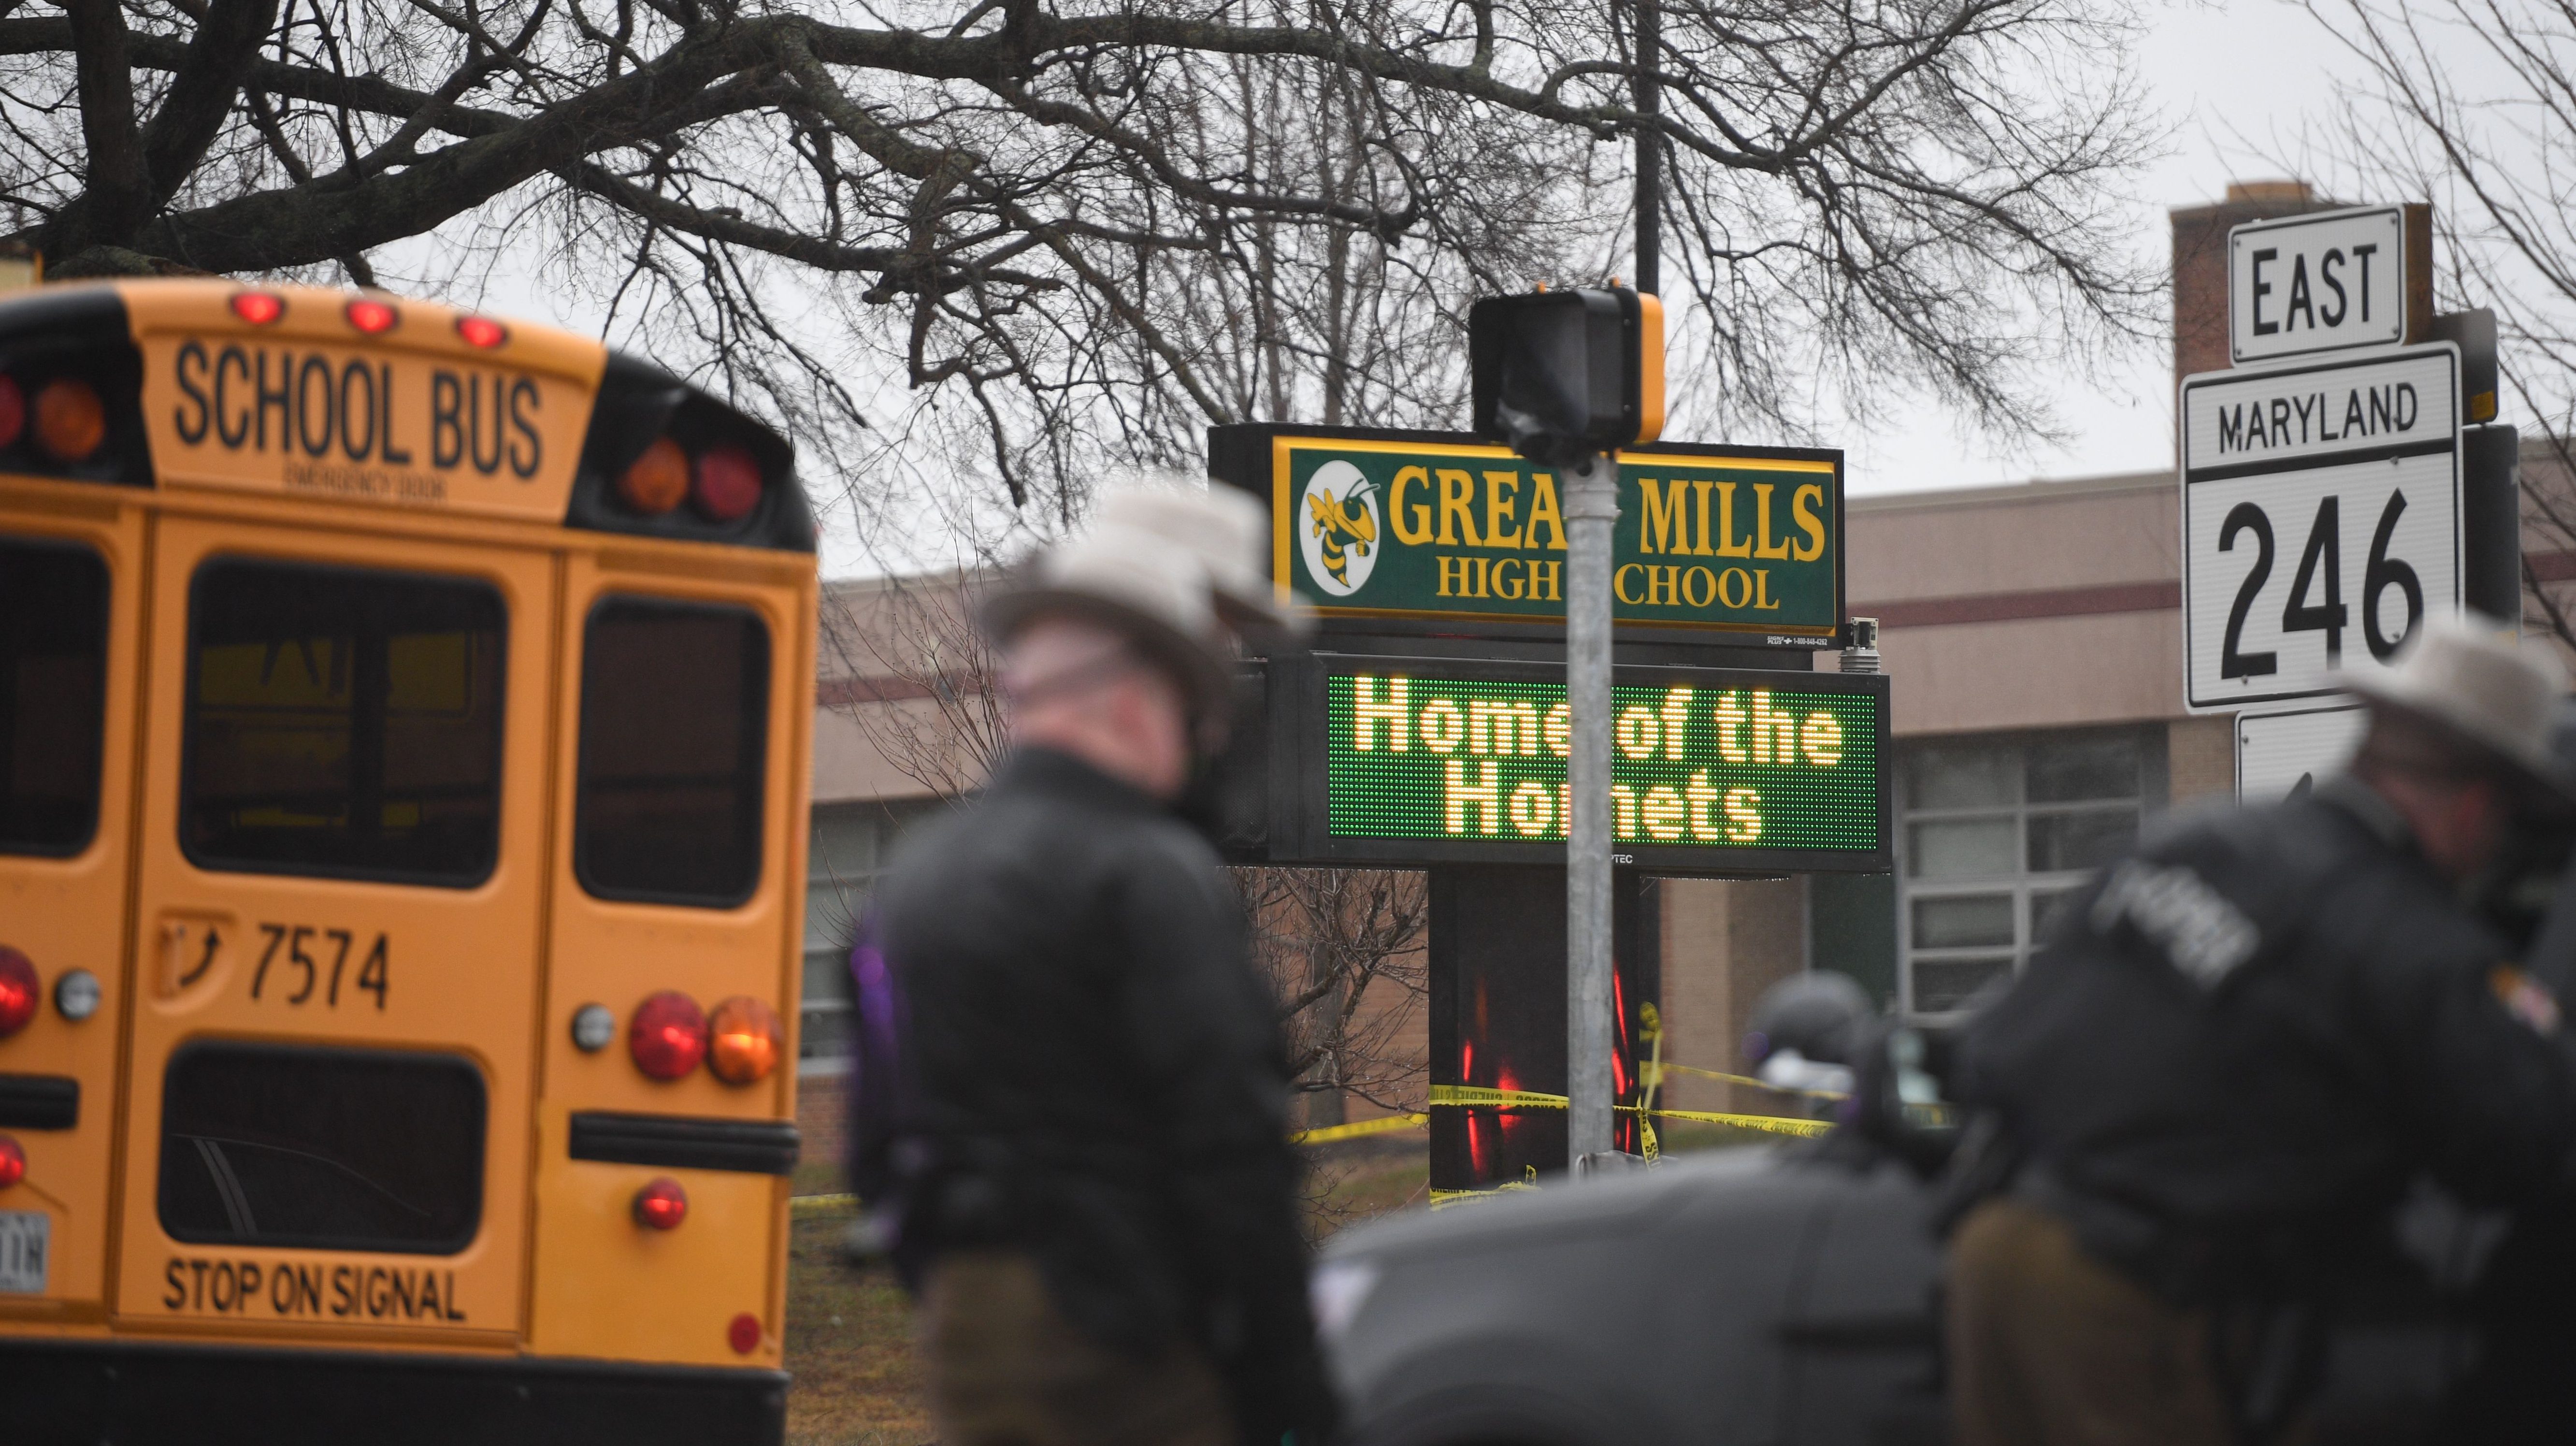 Great Mills High School Shooting 5 Fast Facts You Need to Know